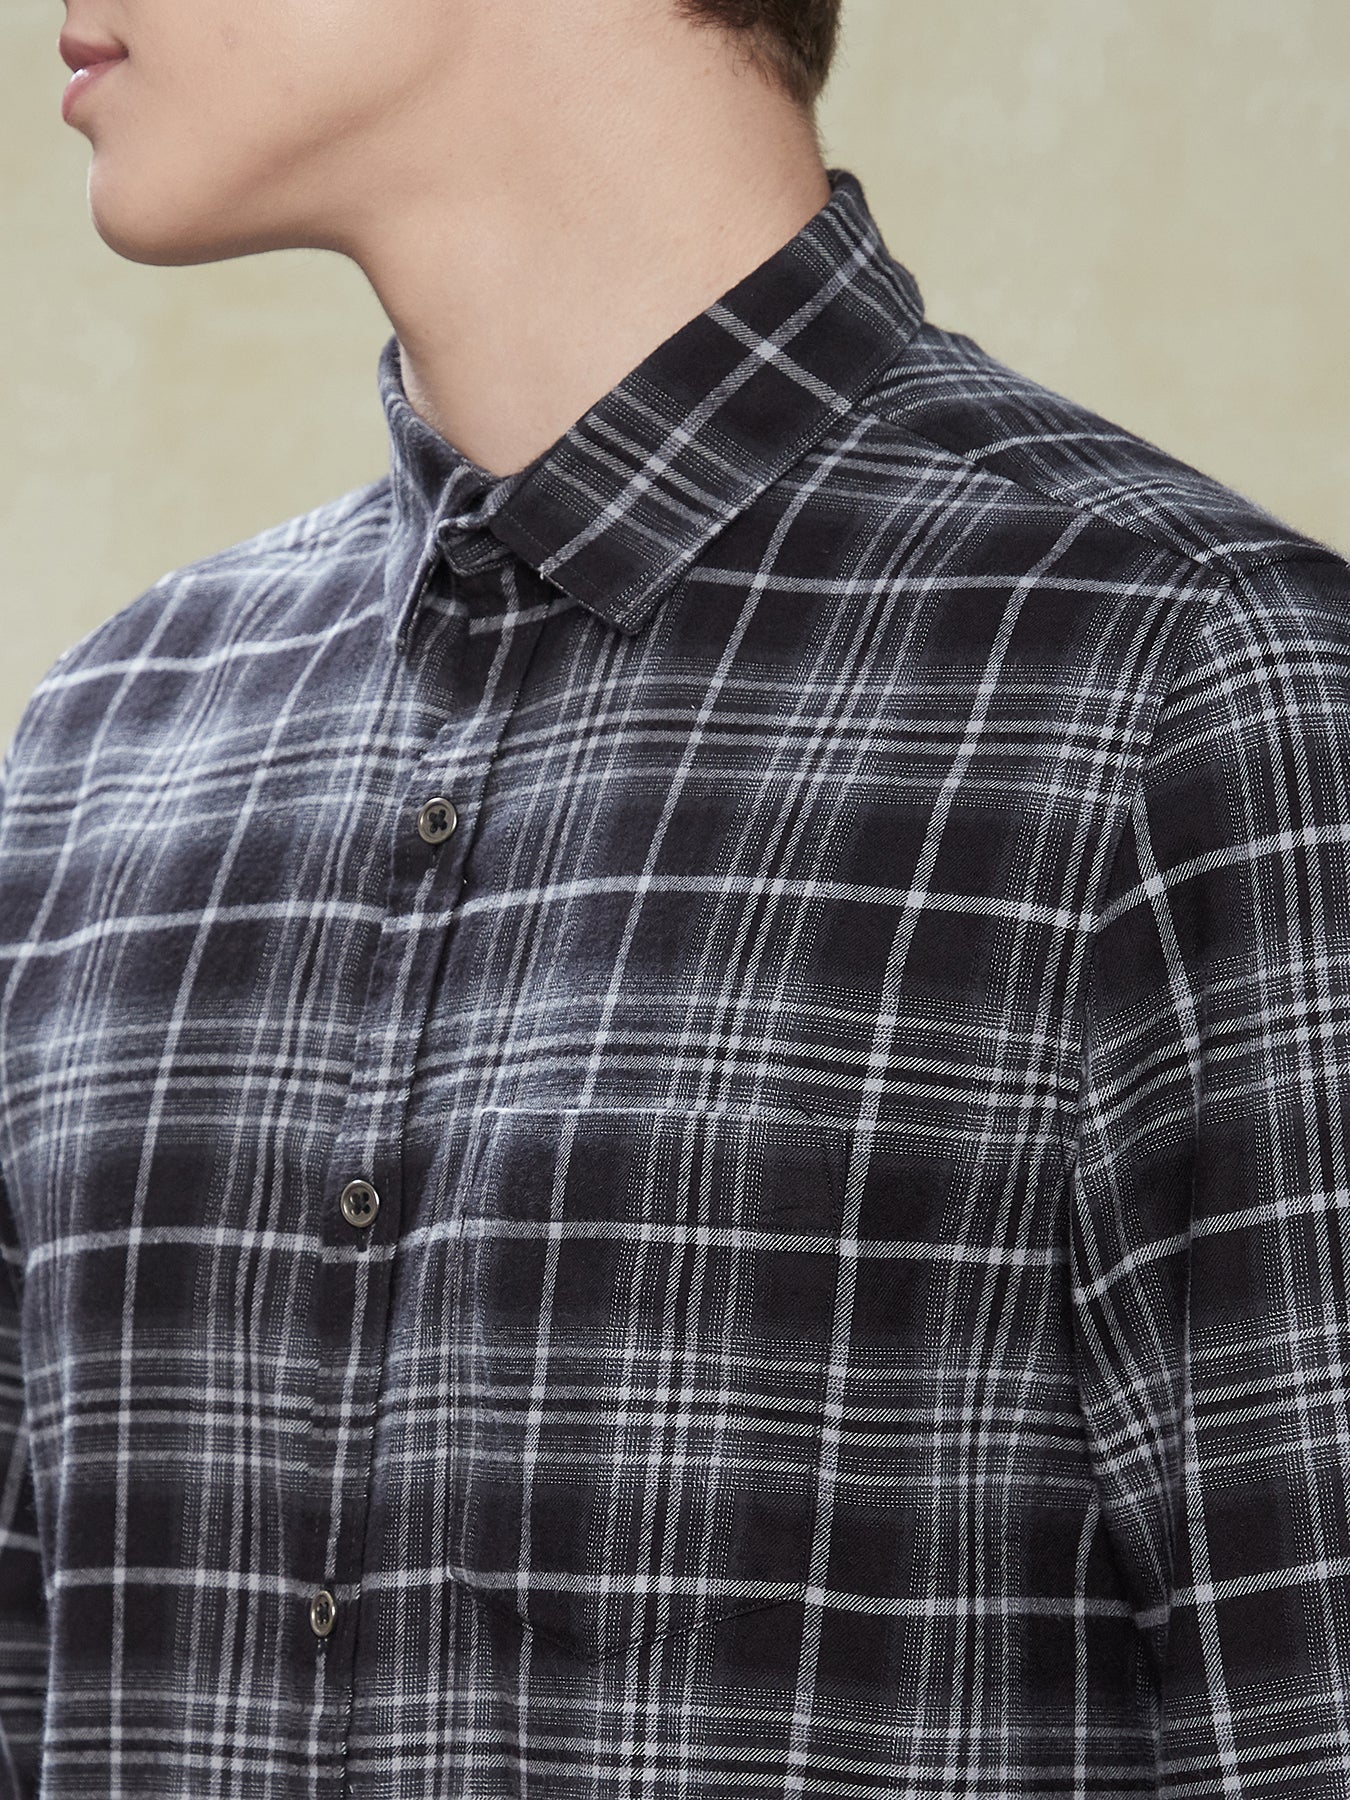 100% Cotton Black Checkered Slim Fit Full Sleeve Casual Shirt